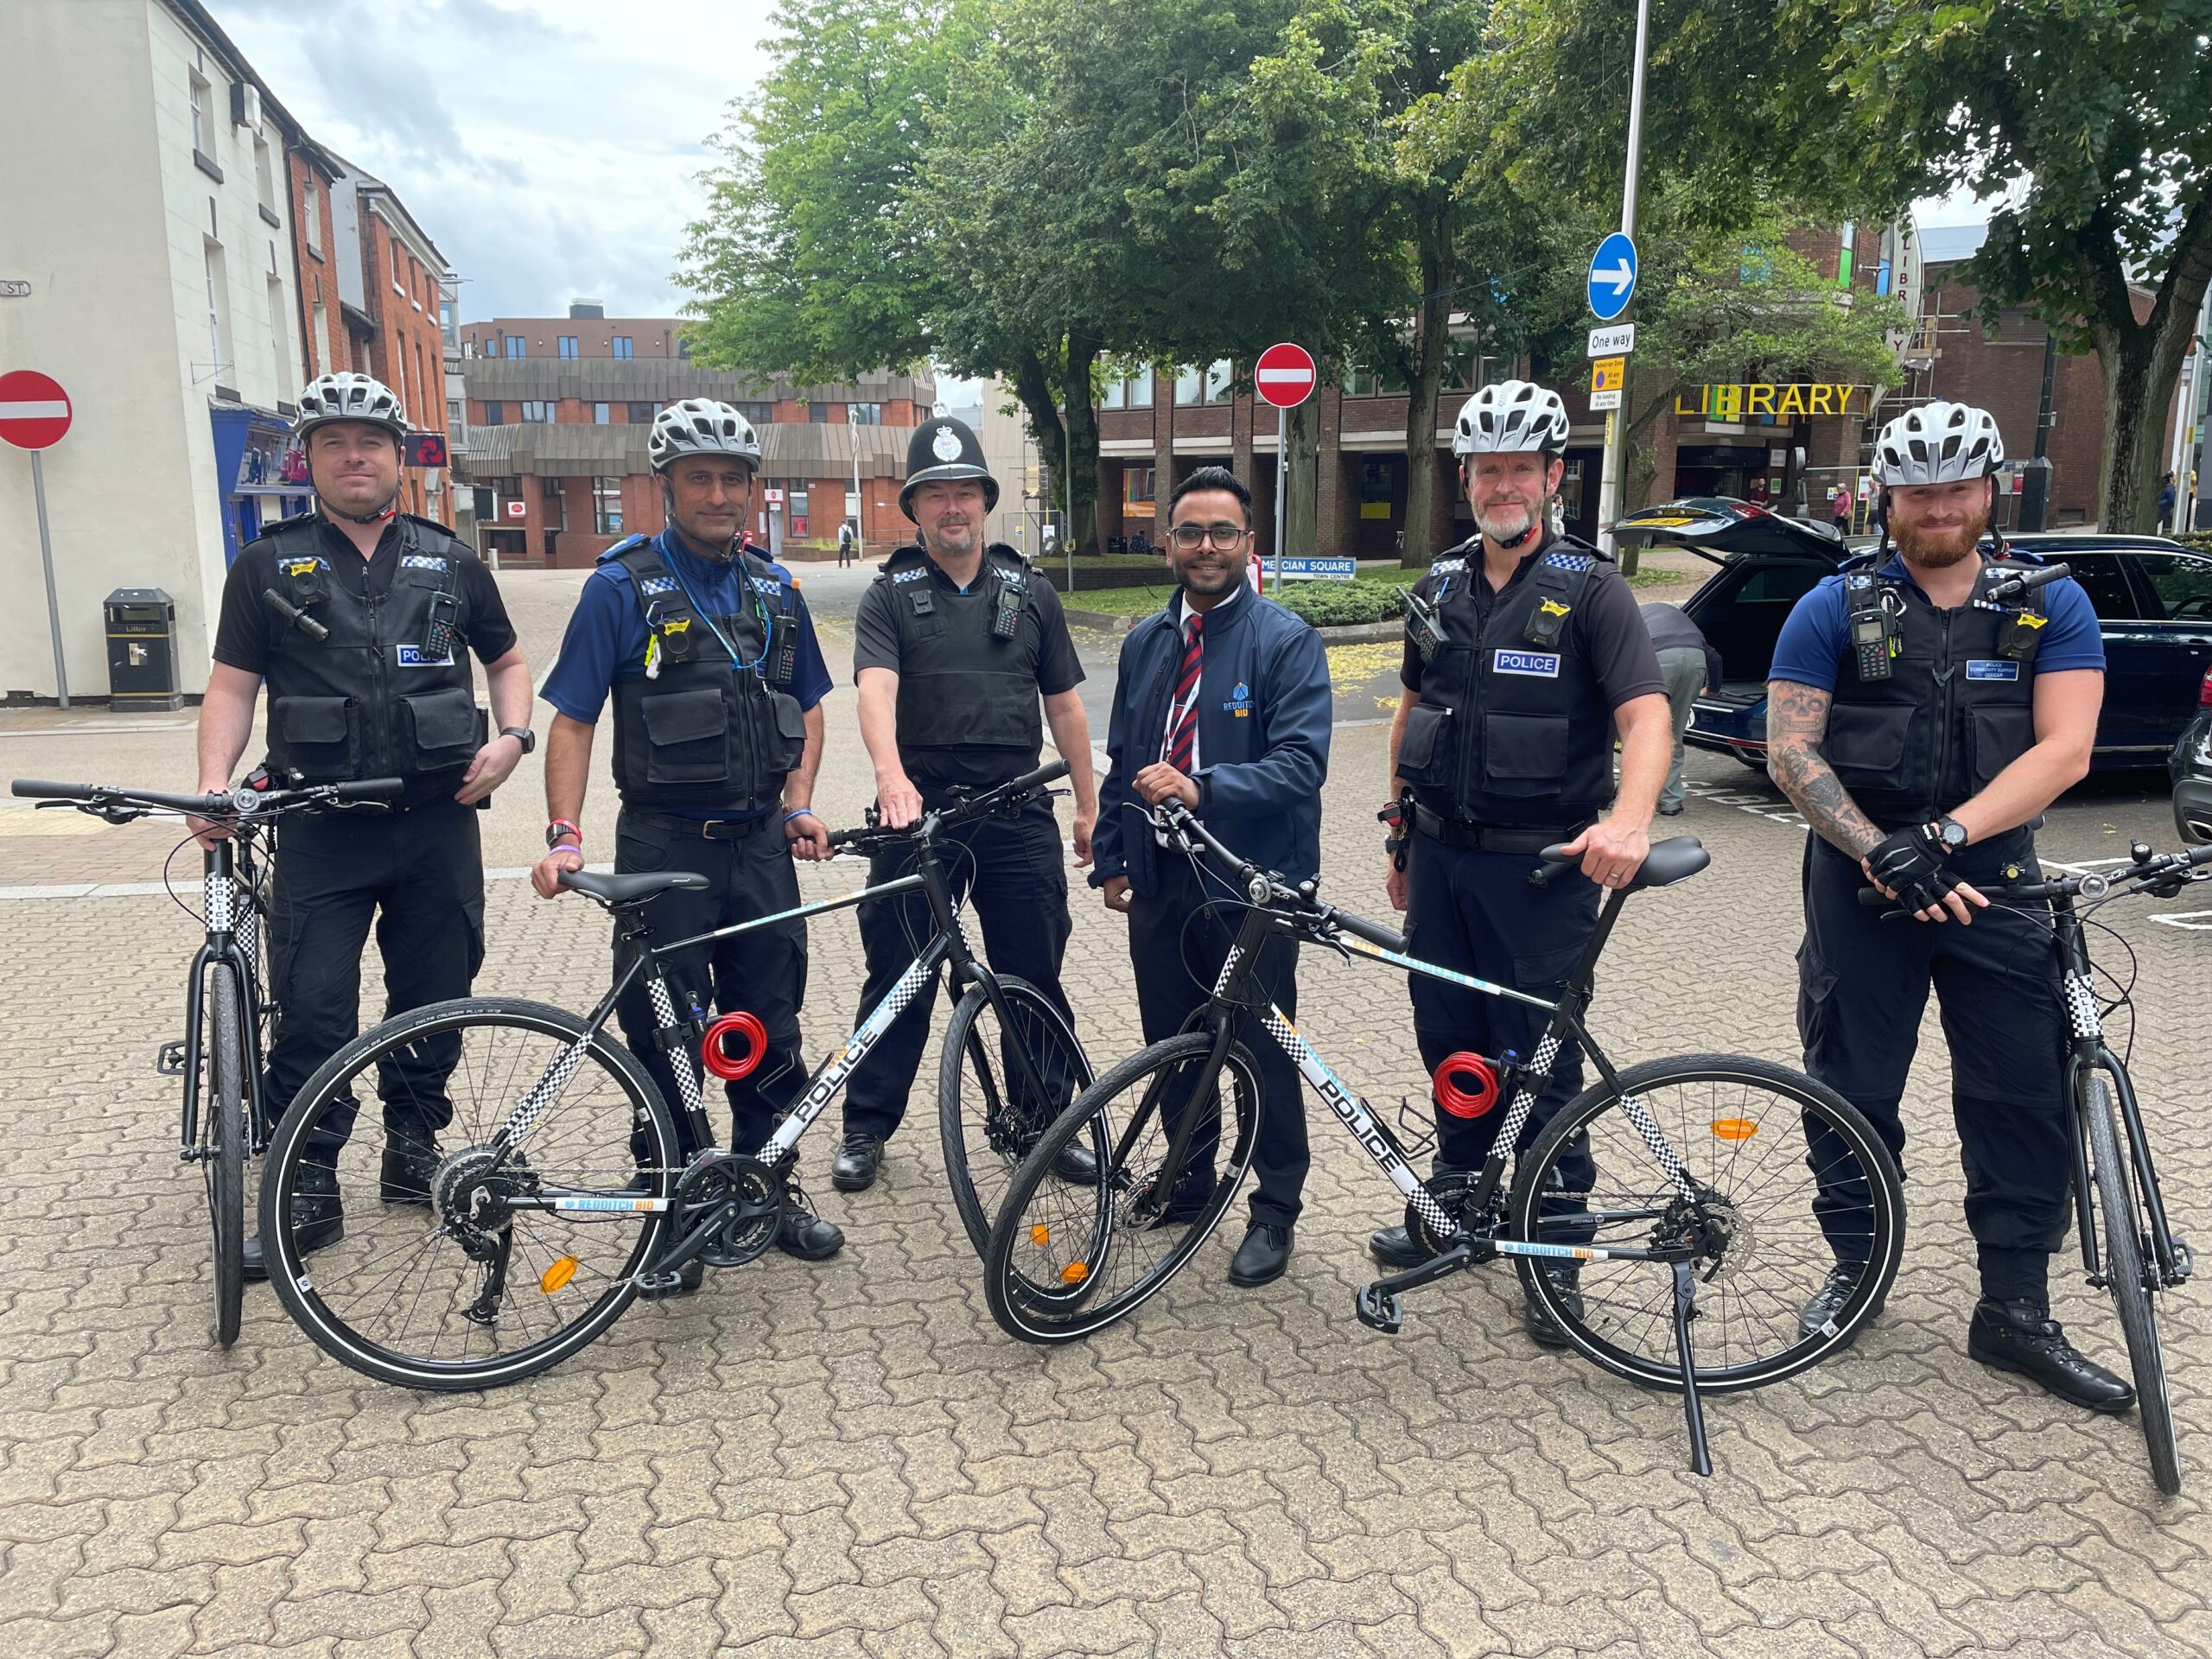 Redditch BID Funds 5 New Bikes for Redditch Police to Enhance Safety in Redditch Town Centre.